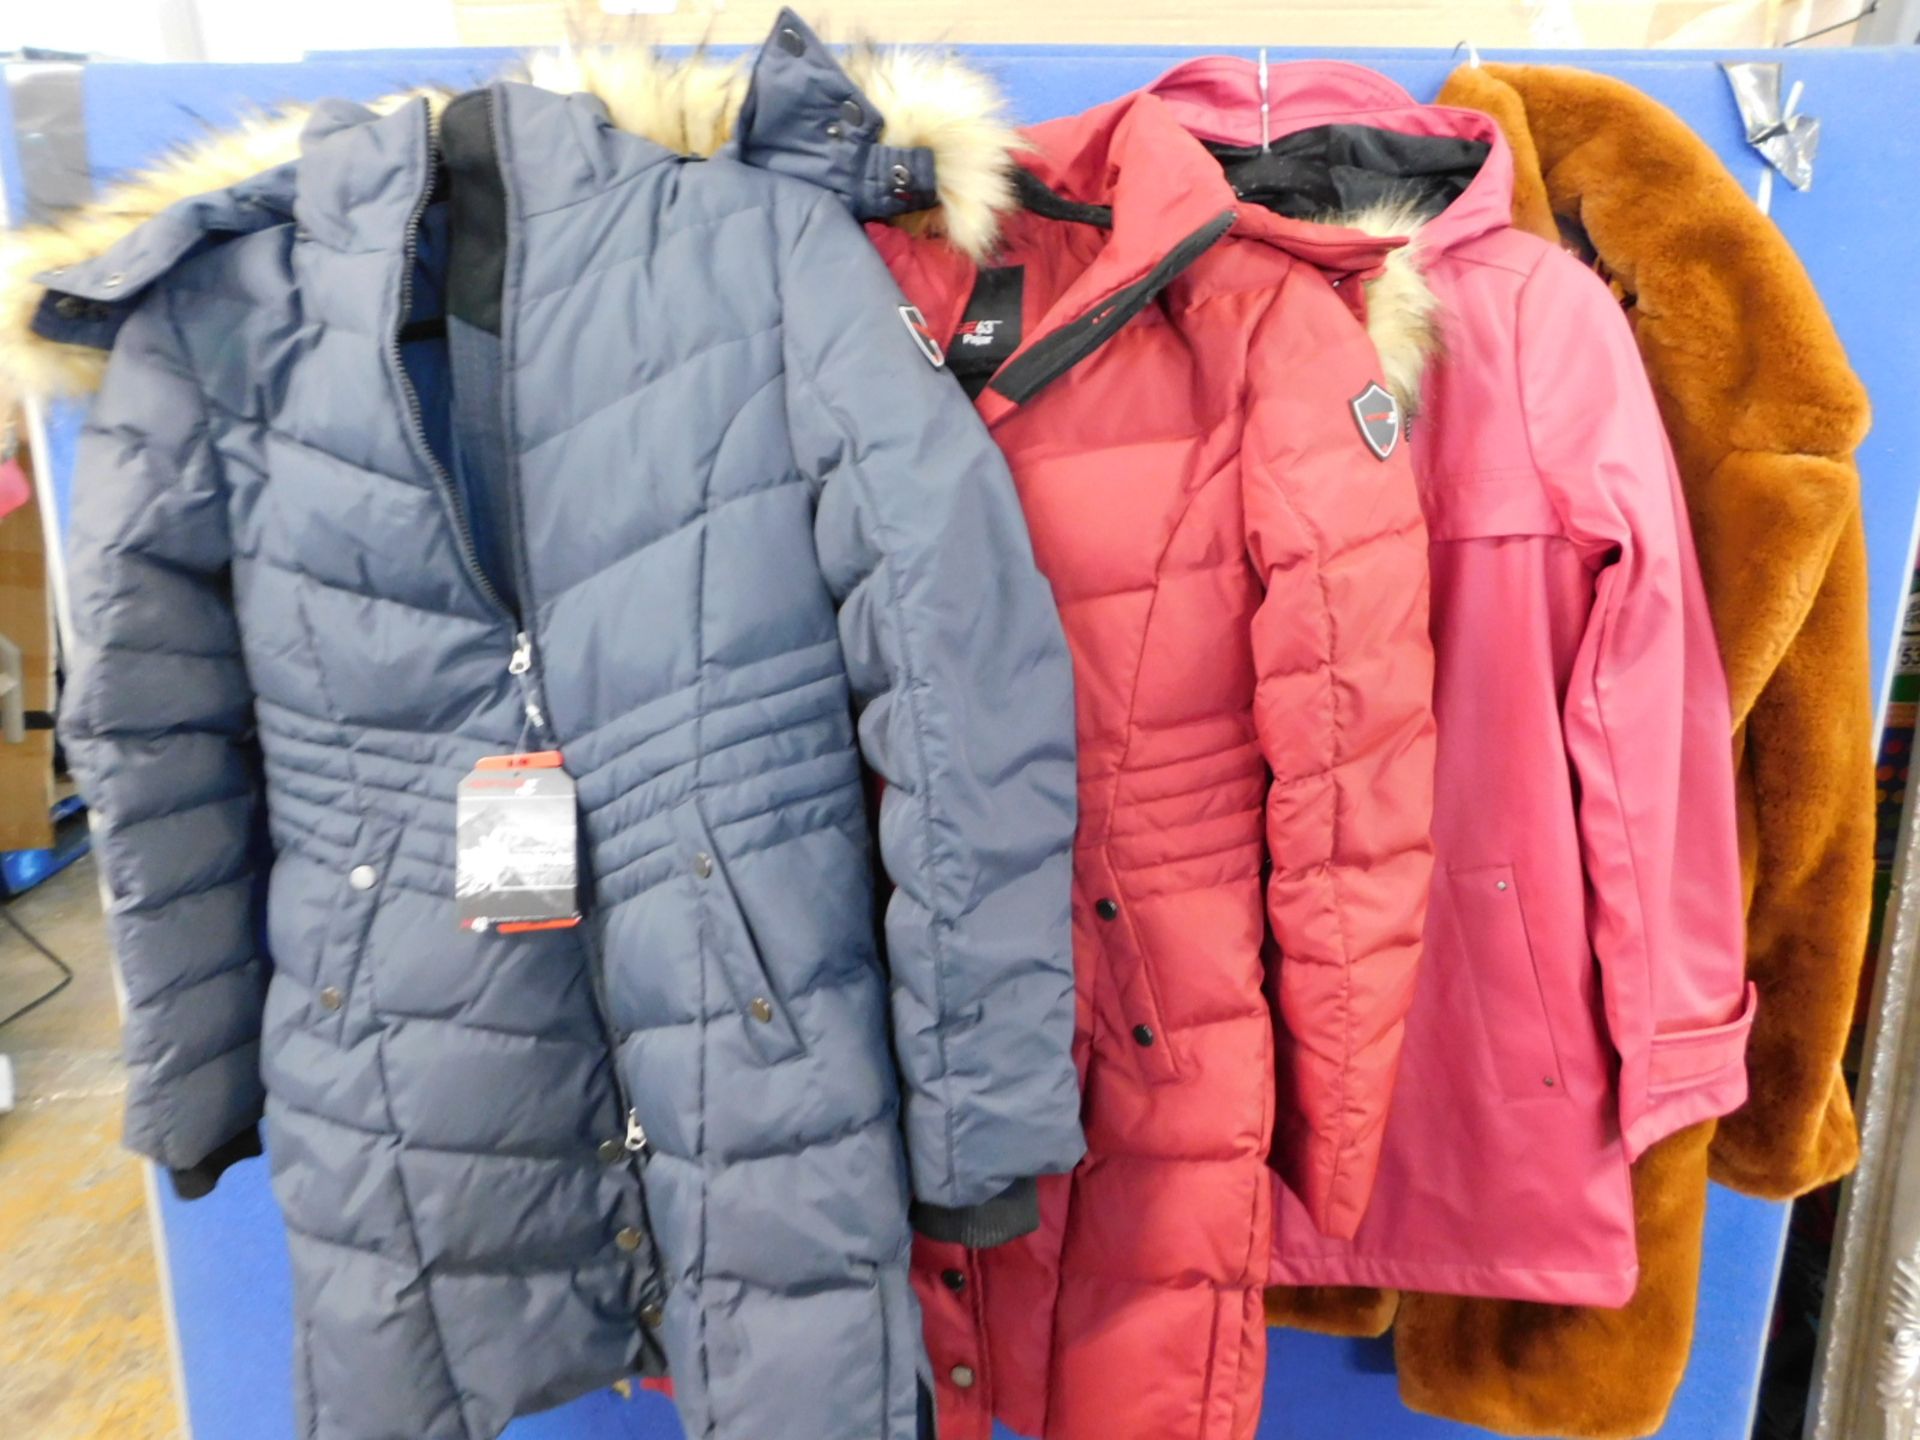 1 JOB LOT OF 4 LADIES JACKETS: 2 X HERITAGE 63 PAJAR LONG PARKA JACKETS WITH DETACHABLE HOODIE